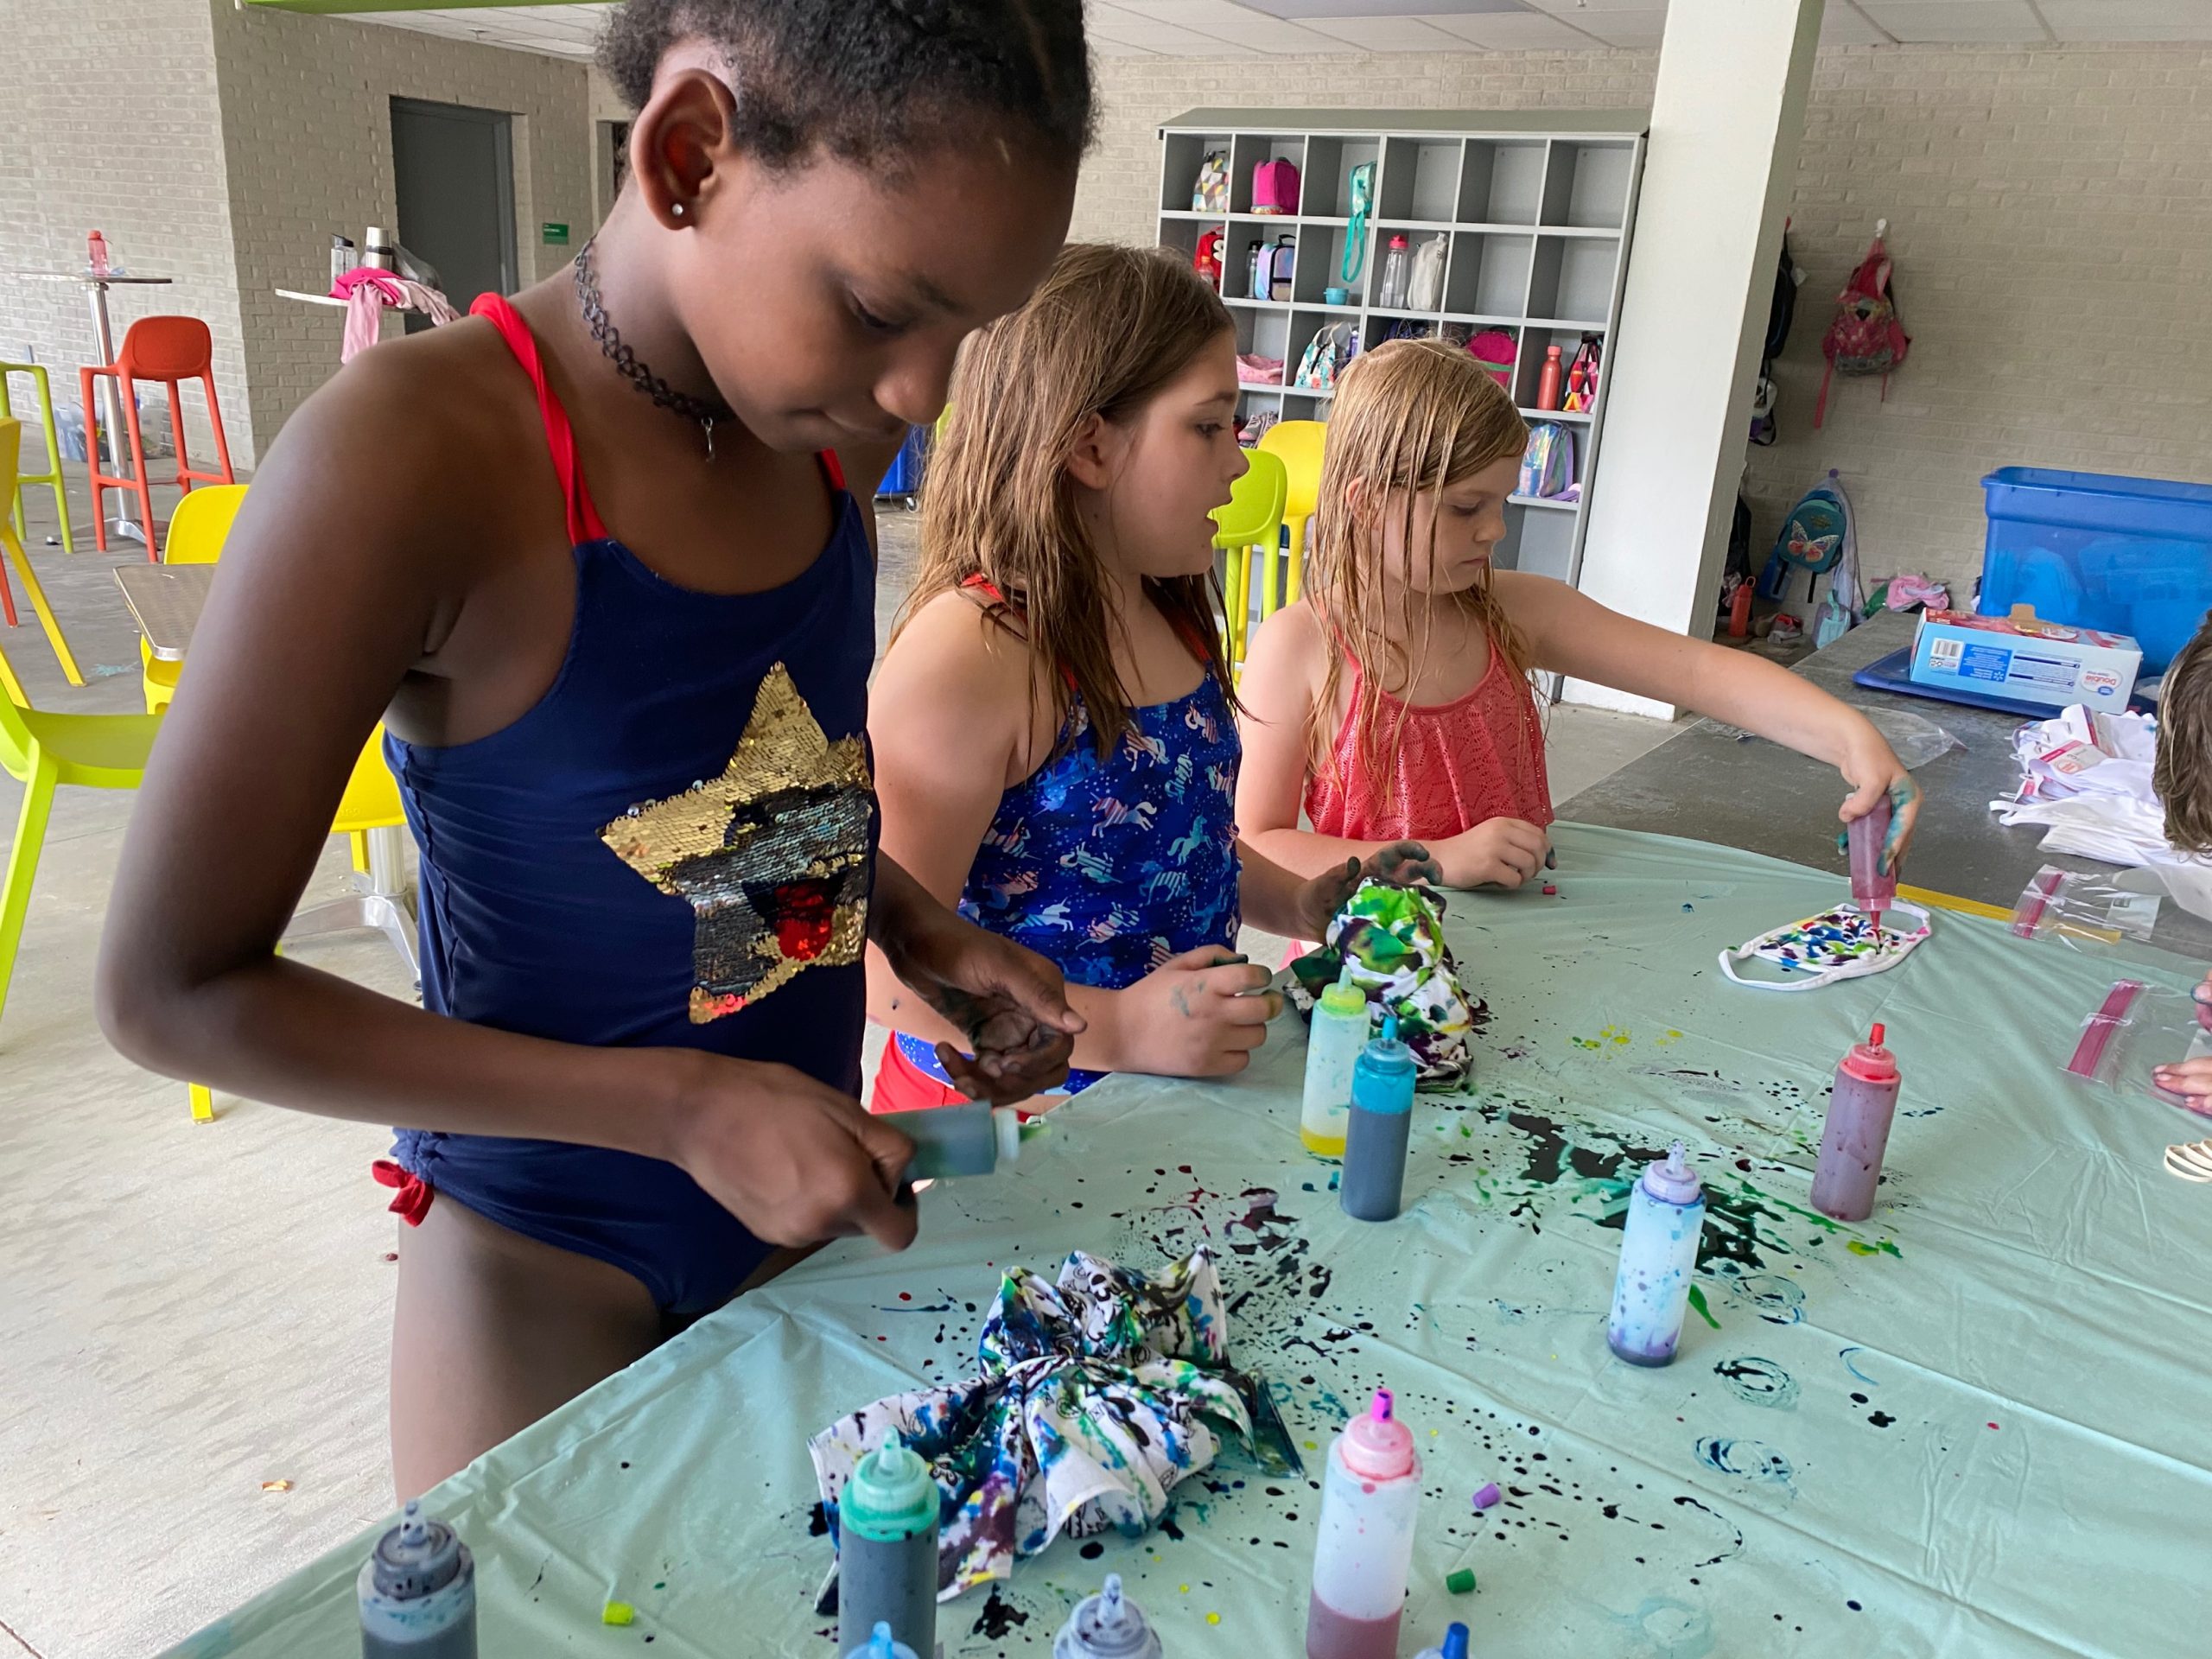 During summer camp, for members and nonmembers, girls design their own tie-dyed shirts on the outdoor patio.